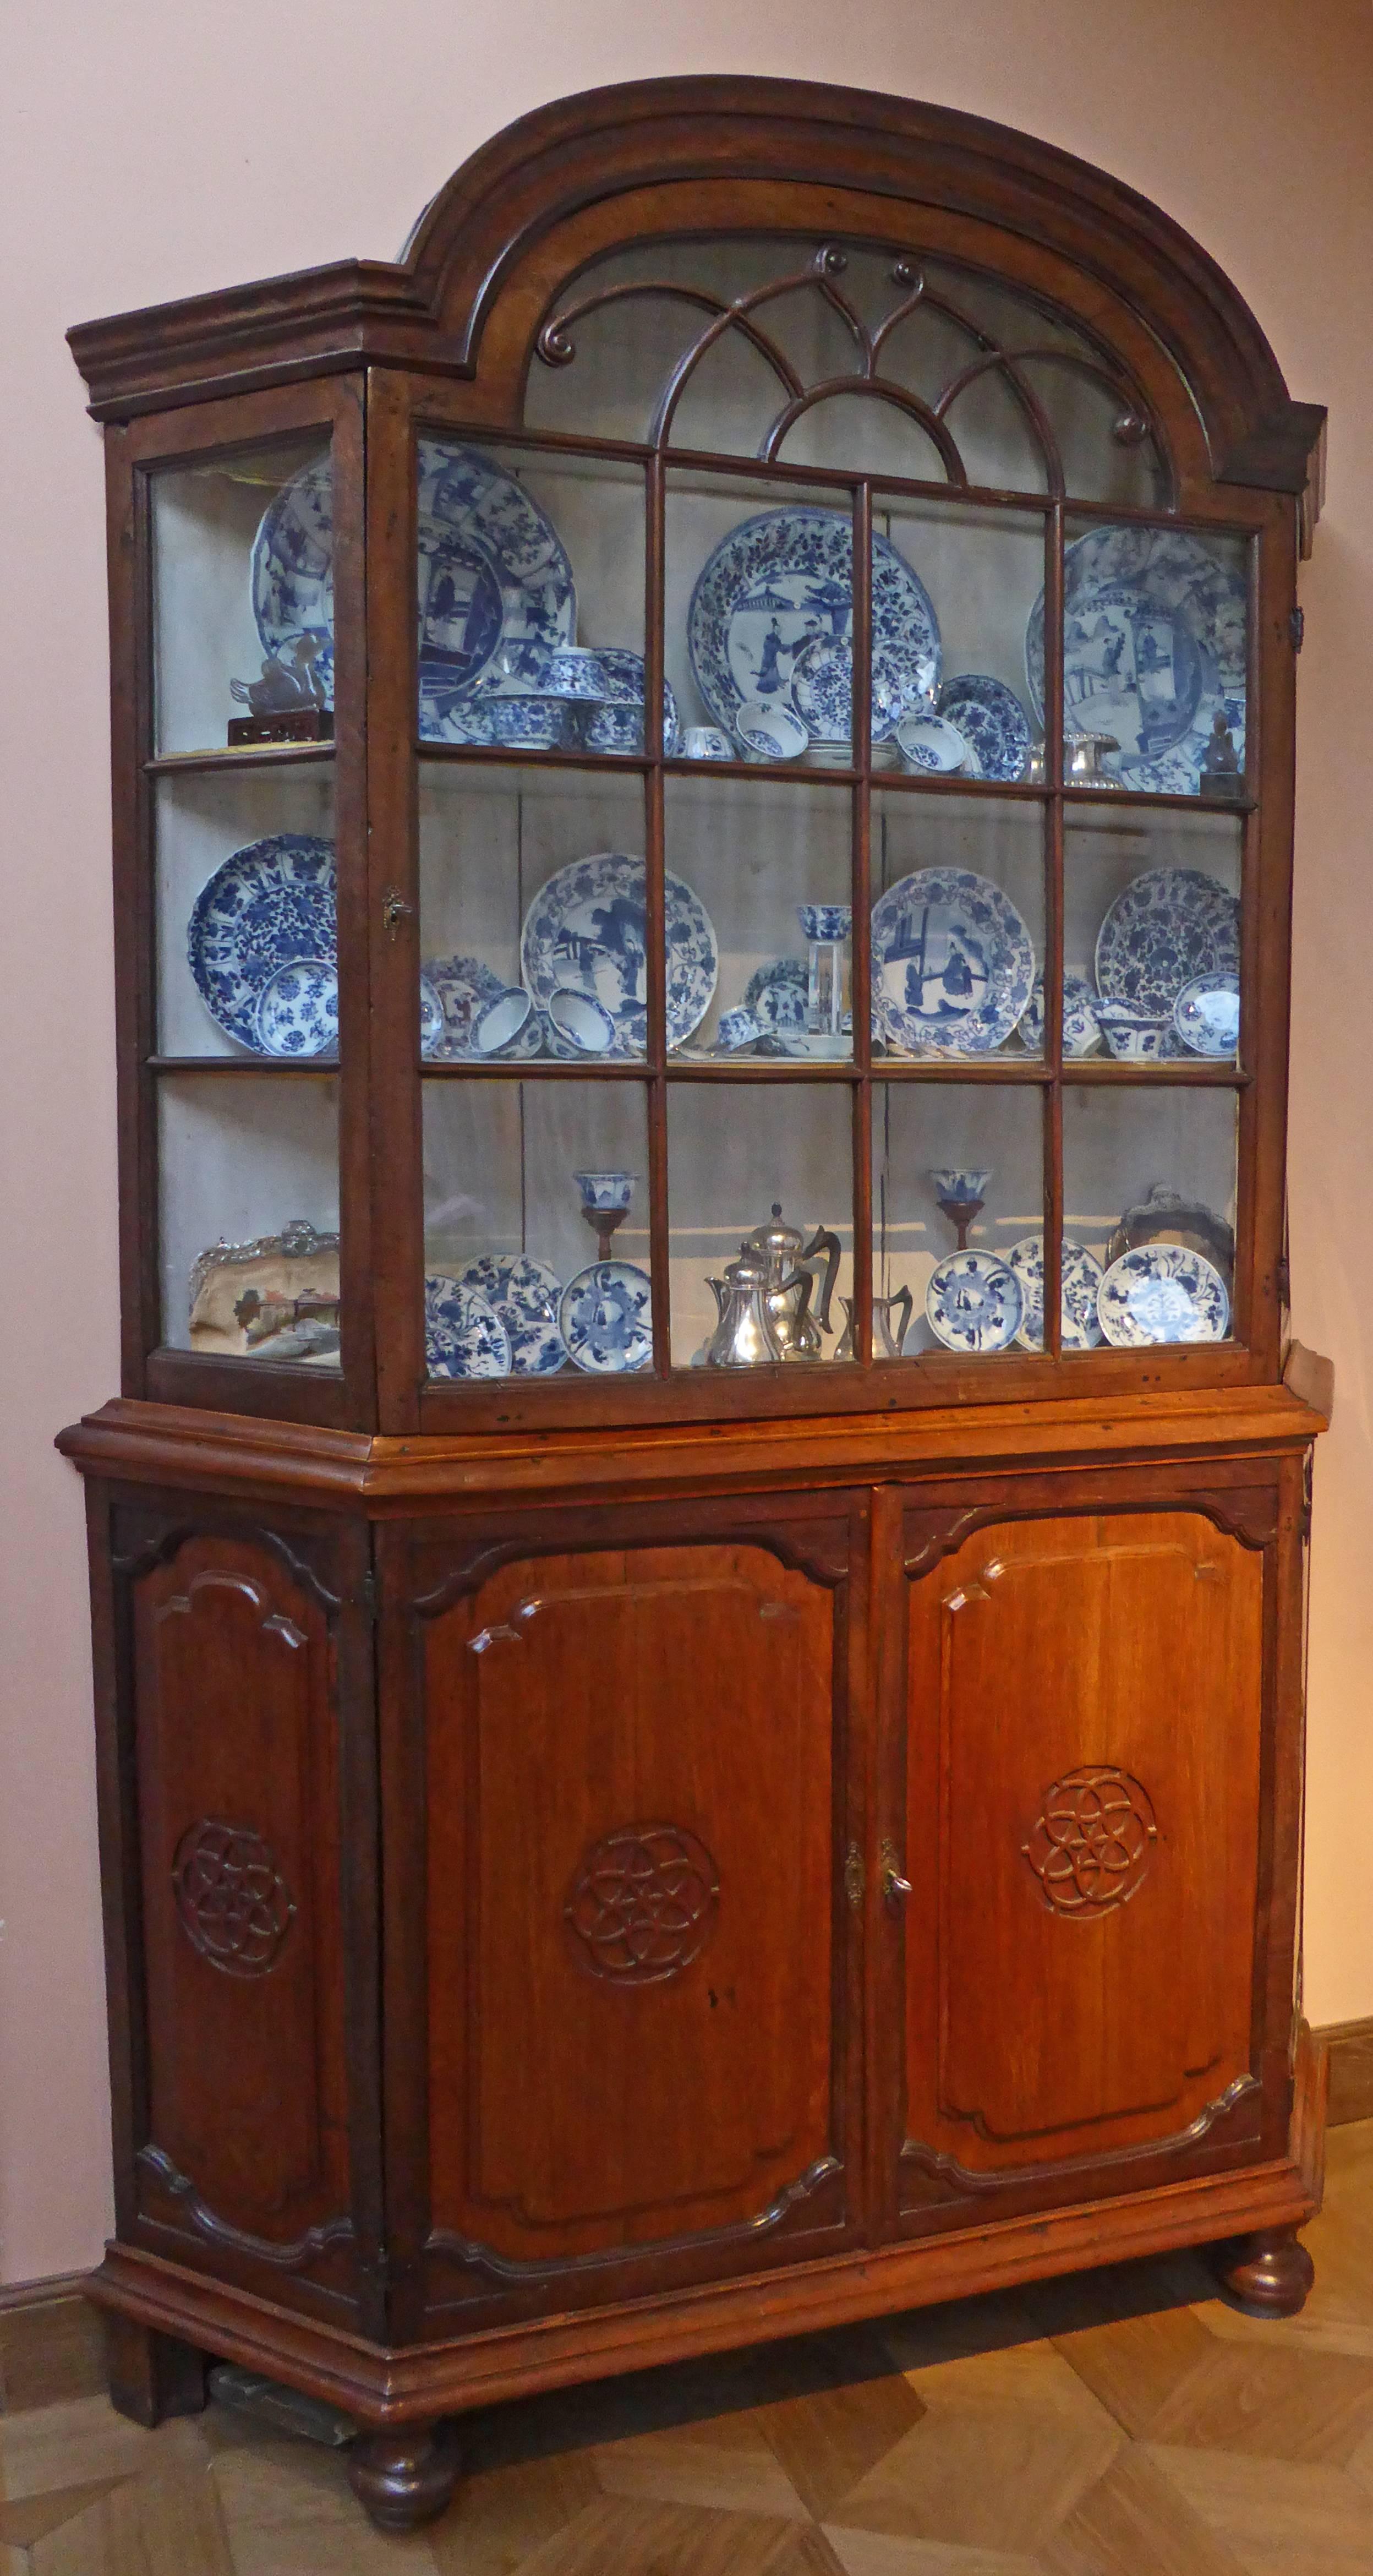 An early example of a display cabinet made of massif exotic woods with original pins and hinges.The arched cornice, one glazed panelled door, enclosing a plain interior with three shelves, glazed panelled corners, the lower part with two panelled